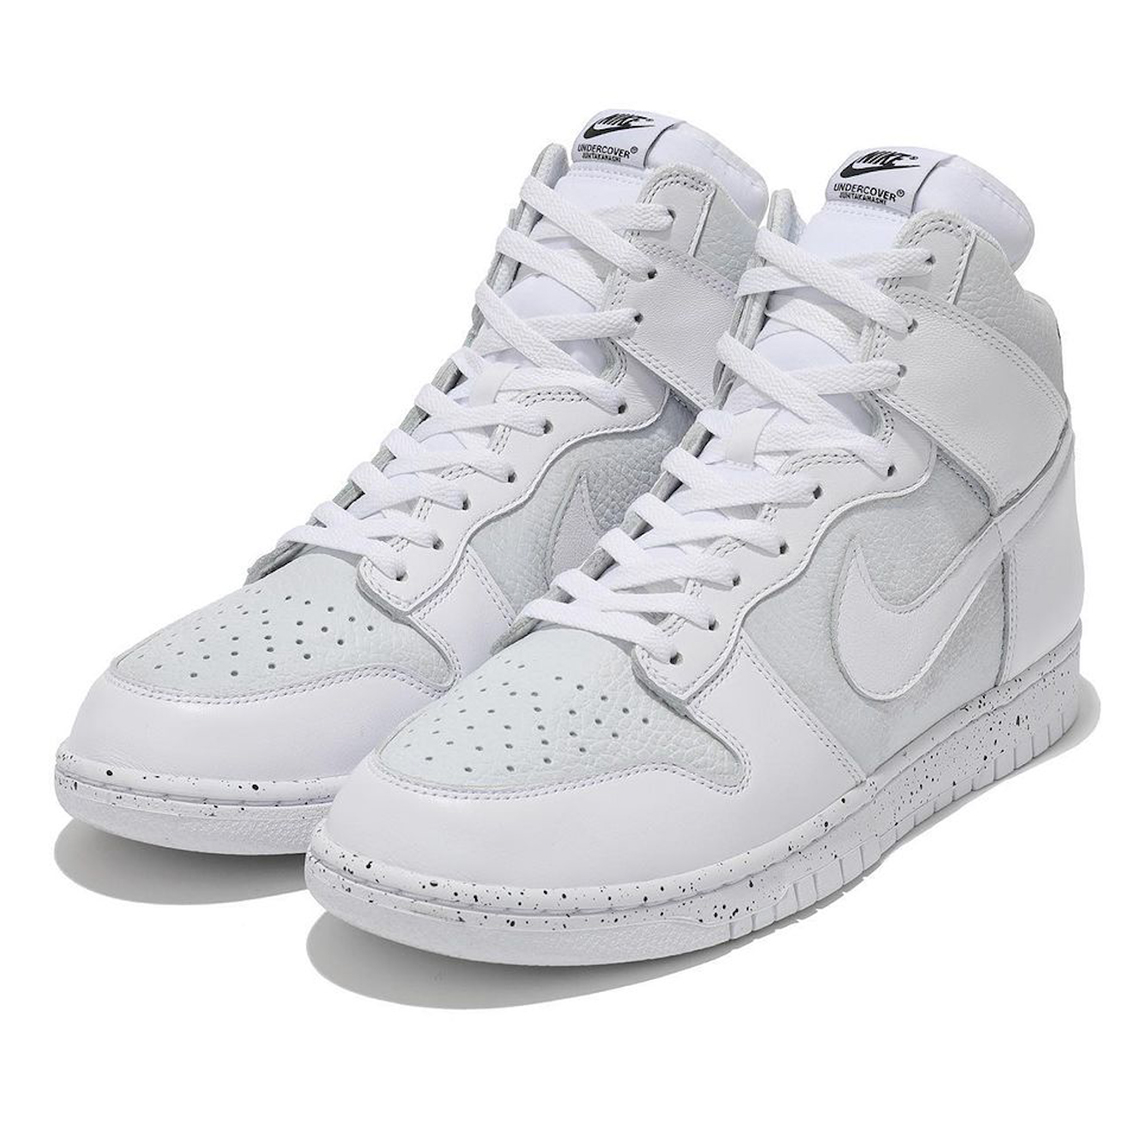 undercover nike dunk high chaos balance white release date 2